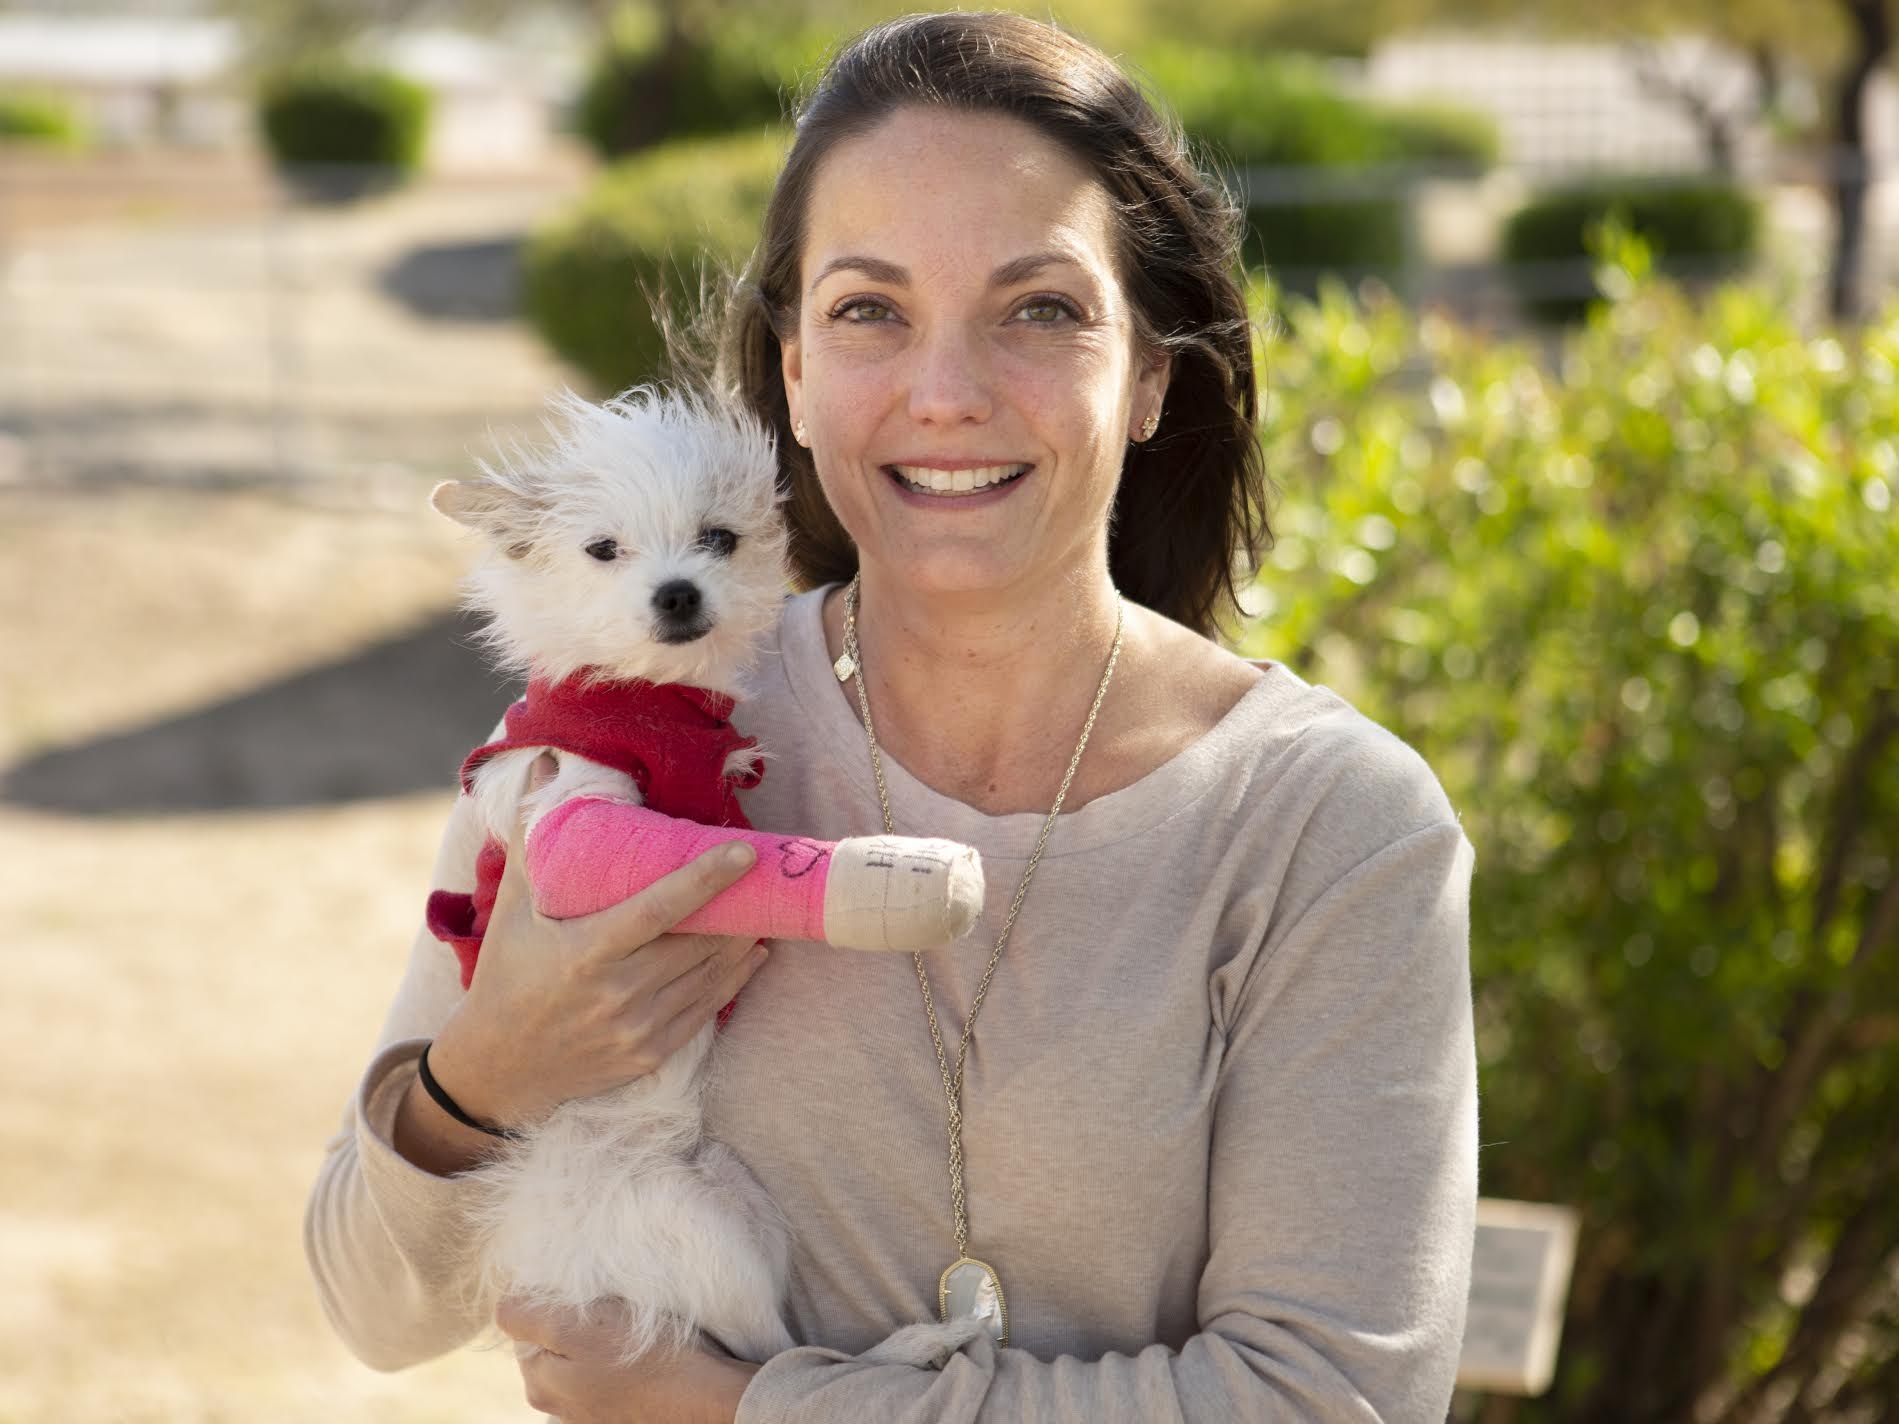 Carrie Hughes is outdoors and smiling while holding a small white dog that has a pink cast on its front right leg.